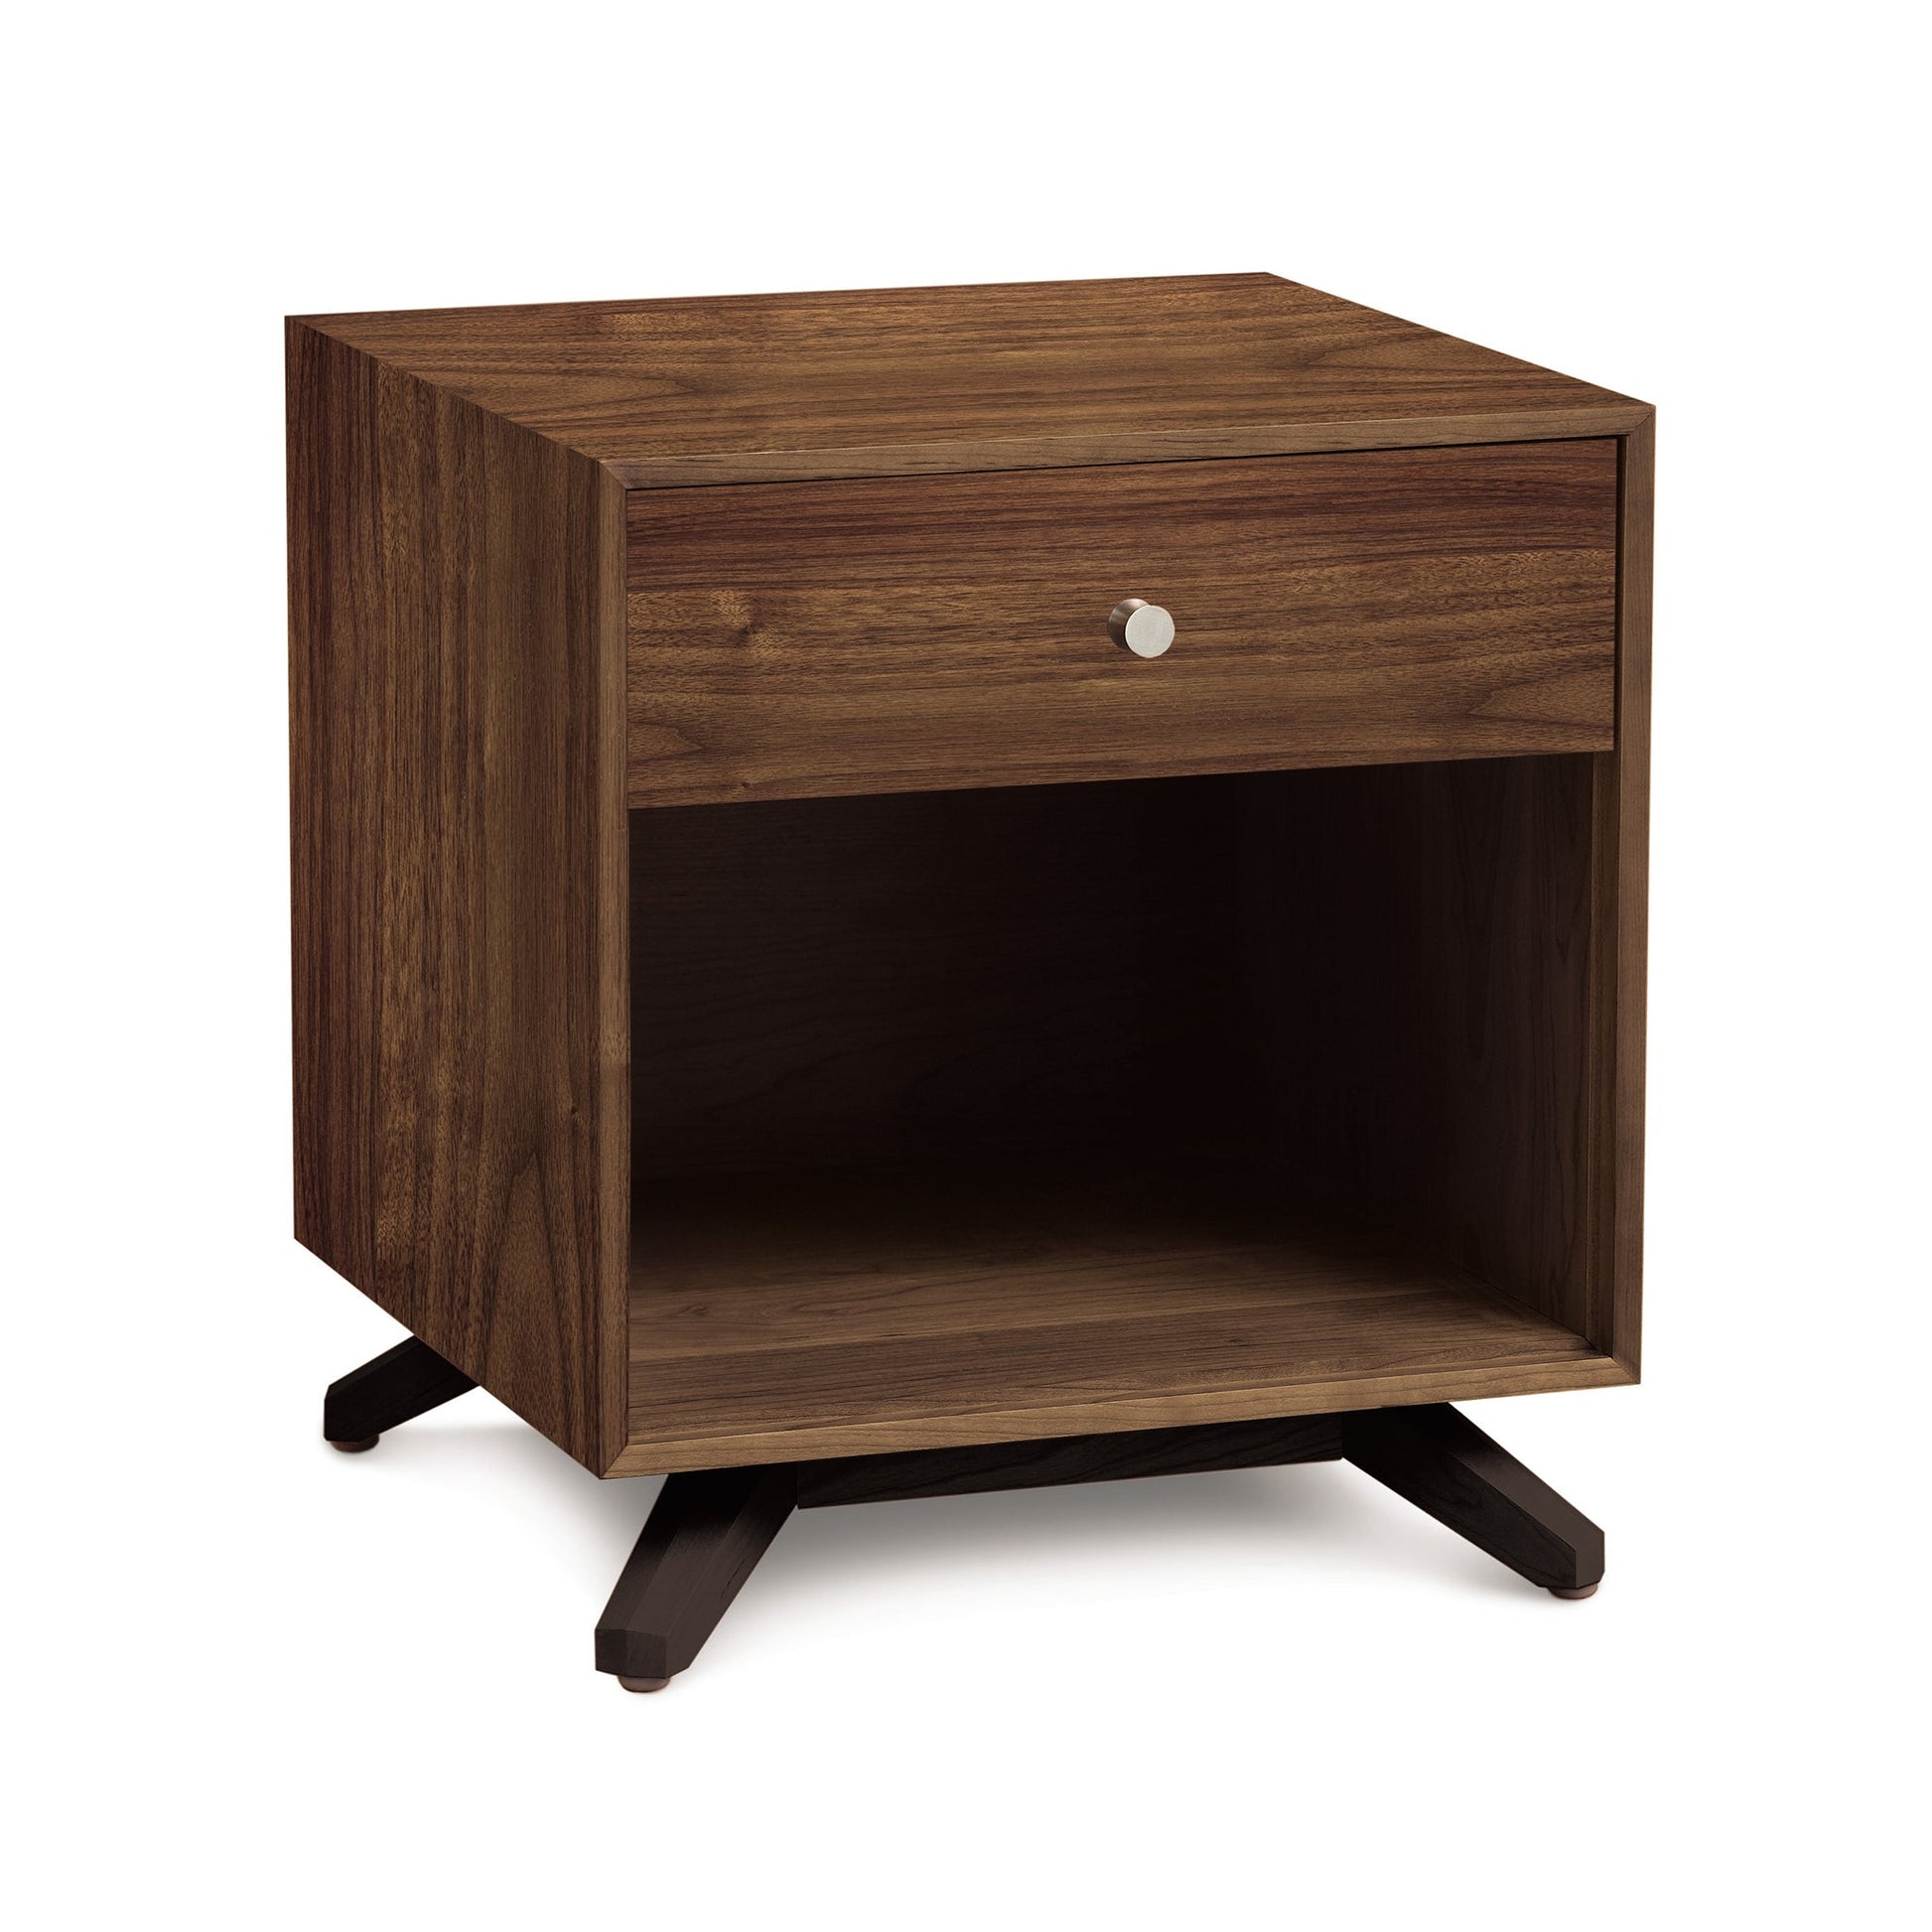 A nightstand with two drawers and a wooden base.